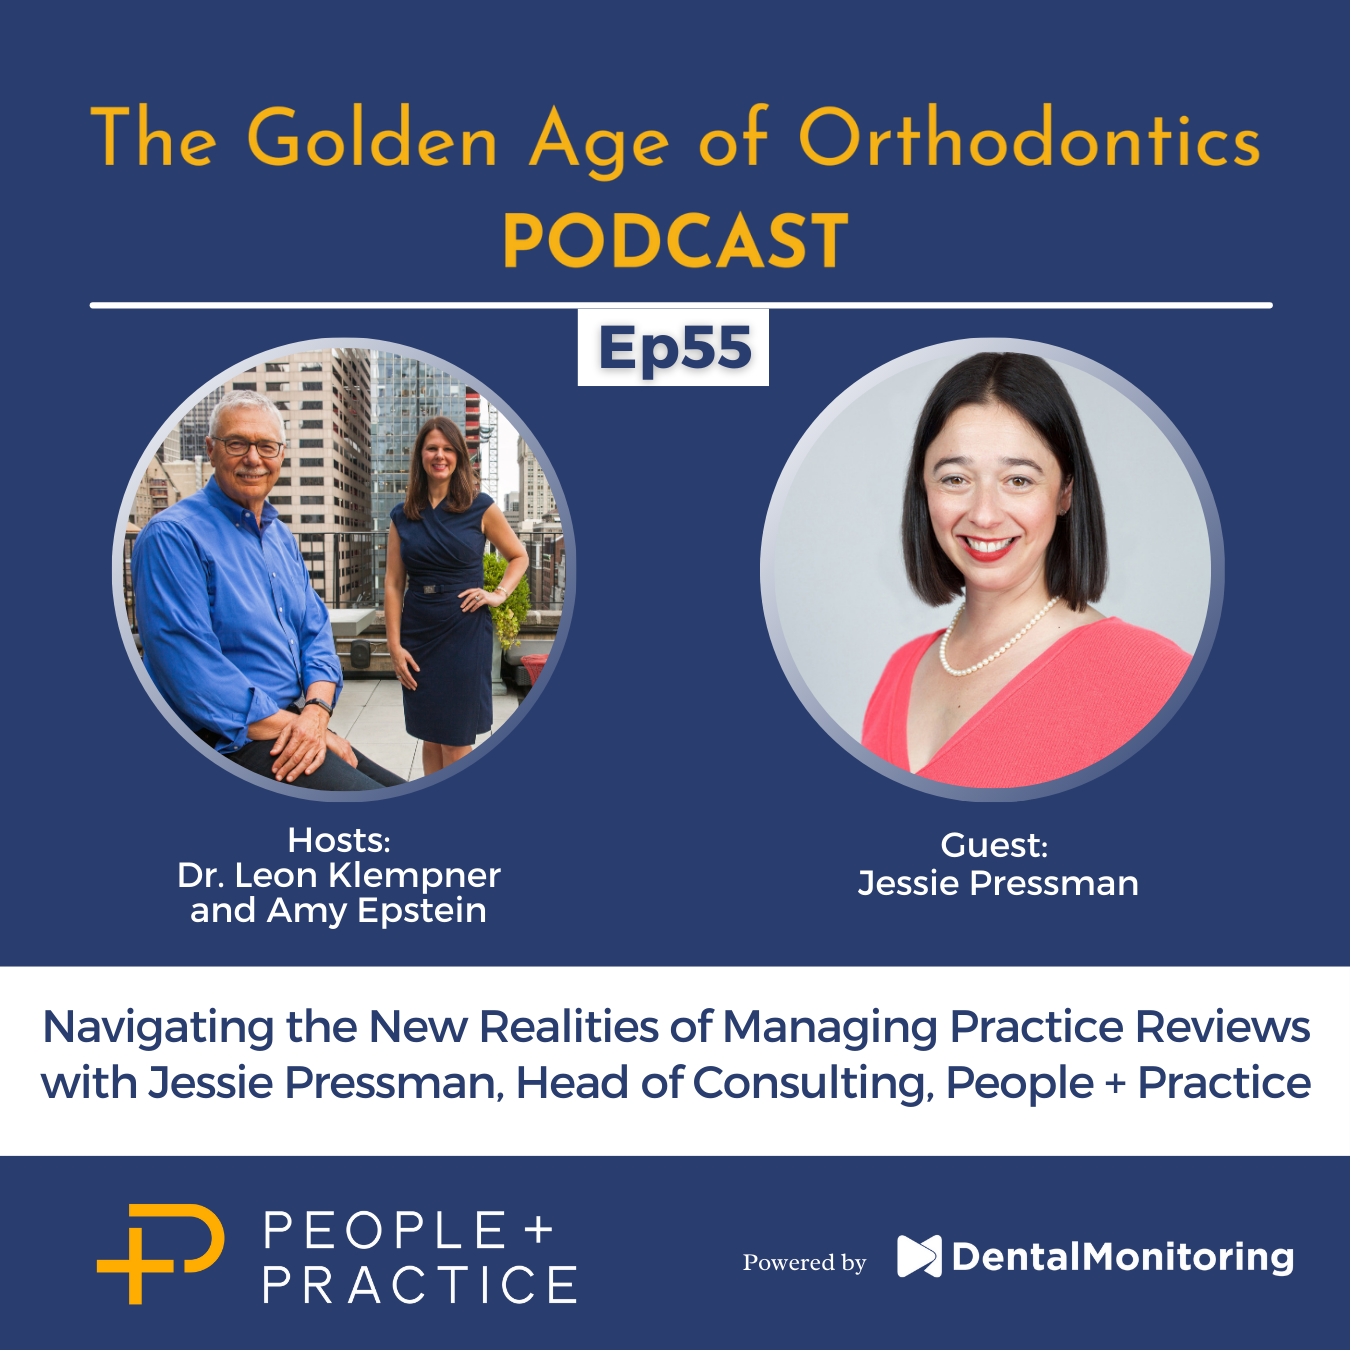 Navigating the New Realities of Managing Practice Reviews with Jessie Pressman, Head of Consulting, People + Practice